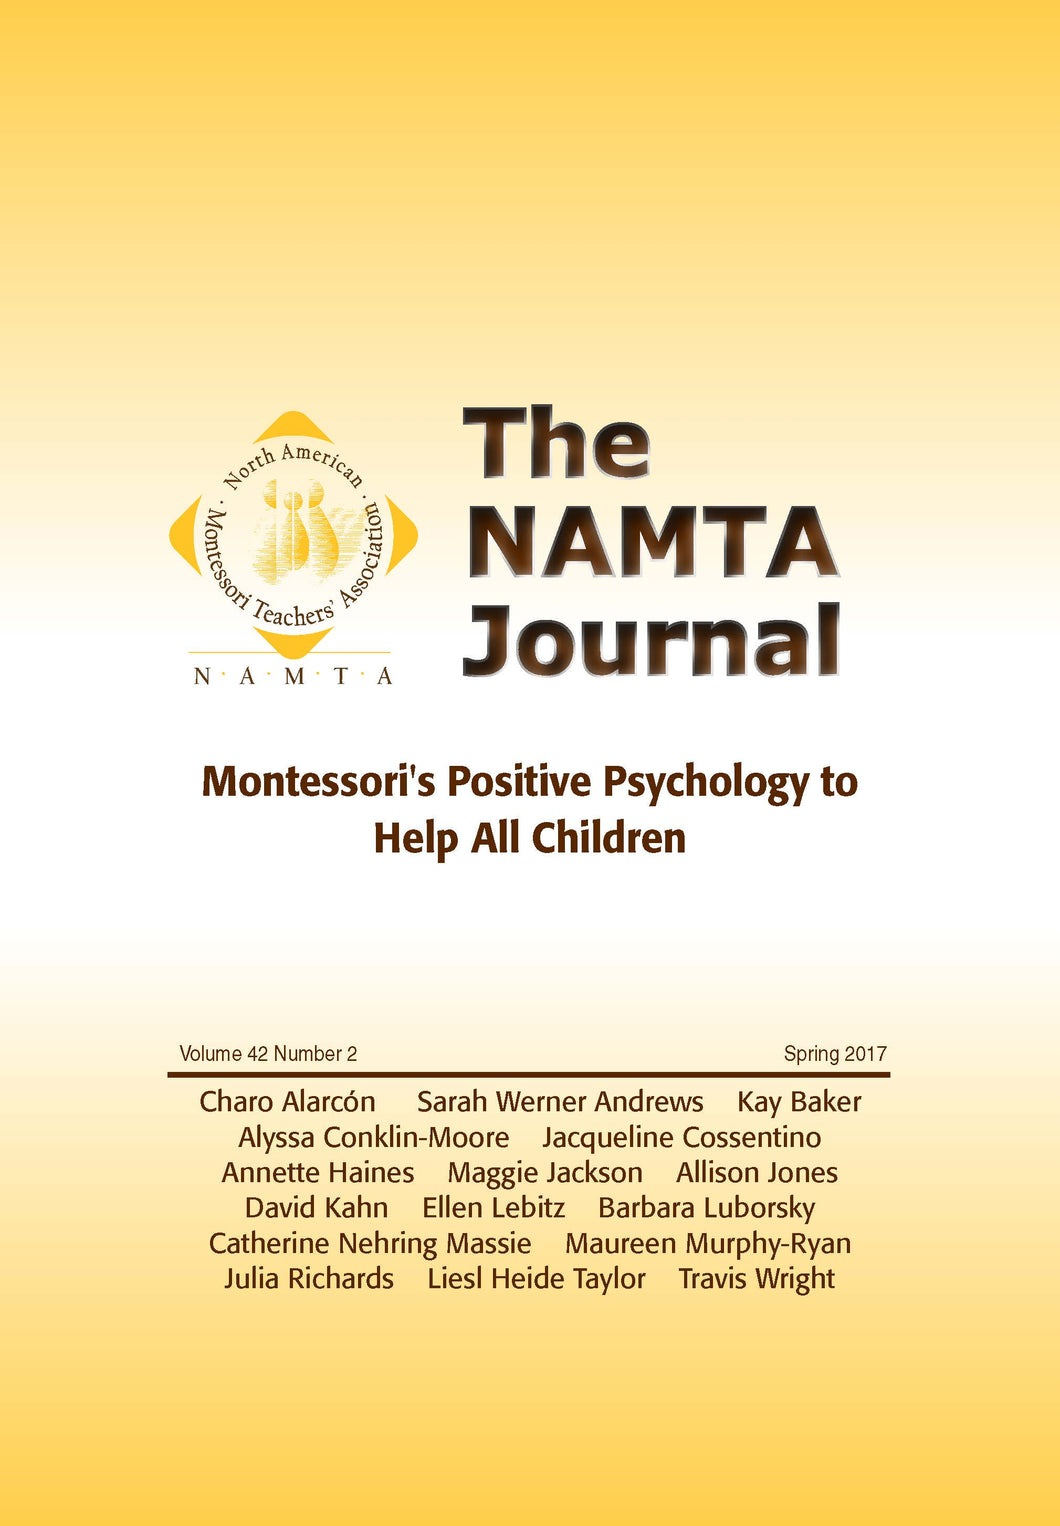 Vol 25, No 2: Montessori Education: Positive Psychology for Today's Challenges